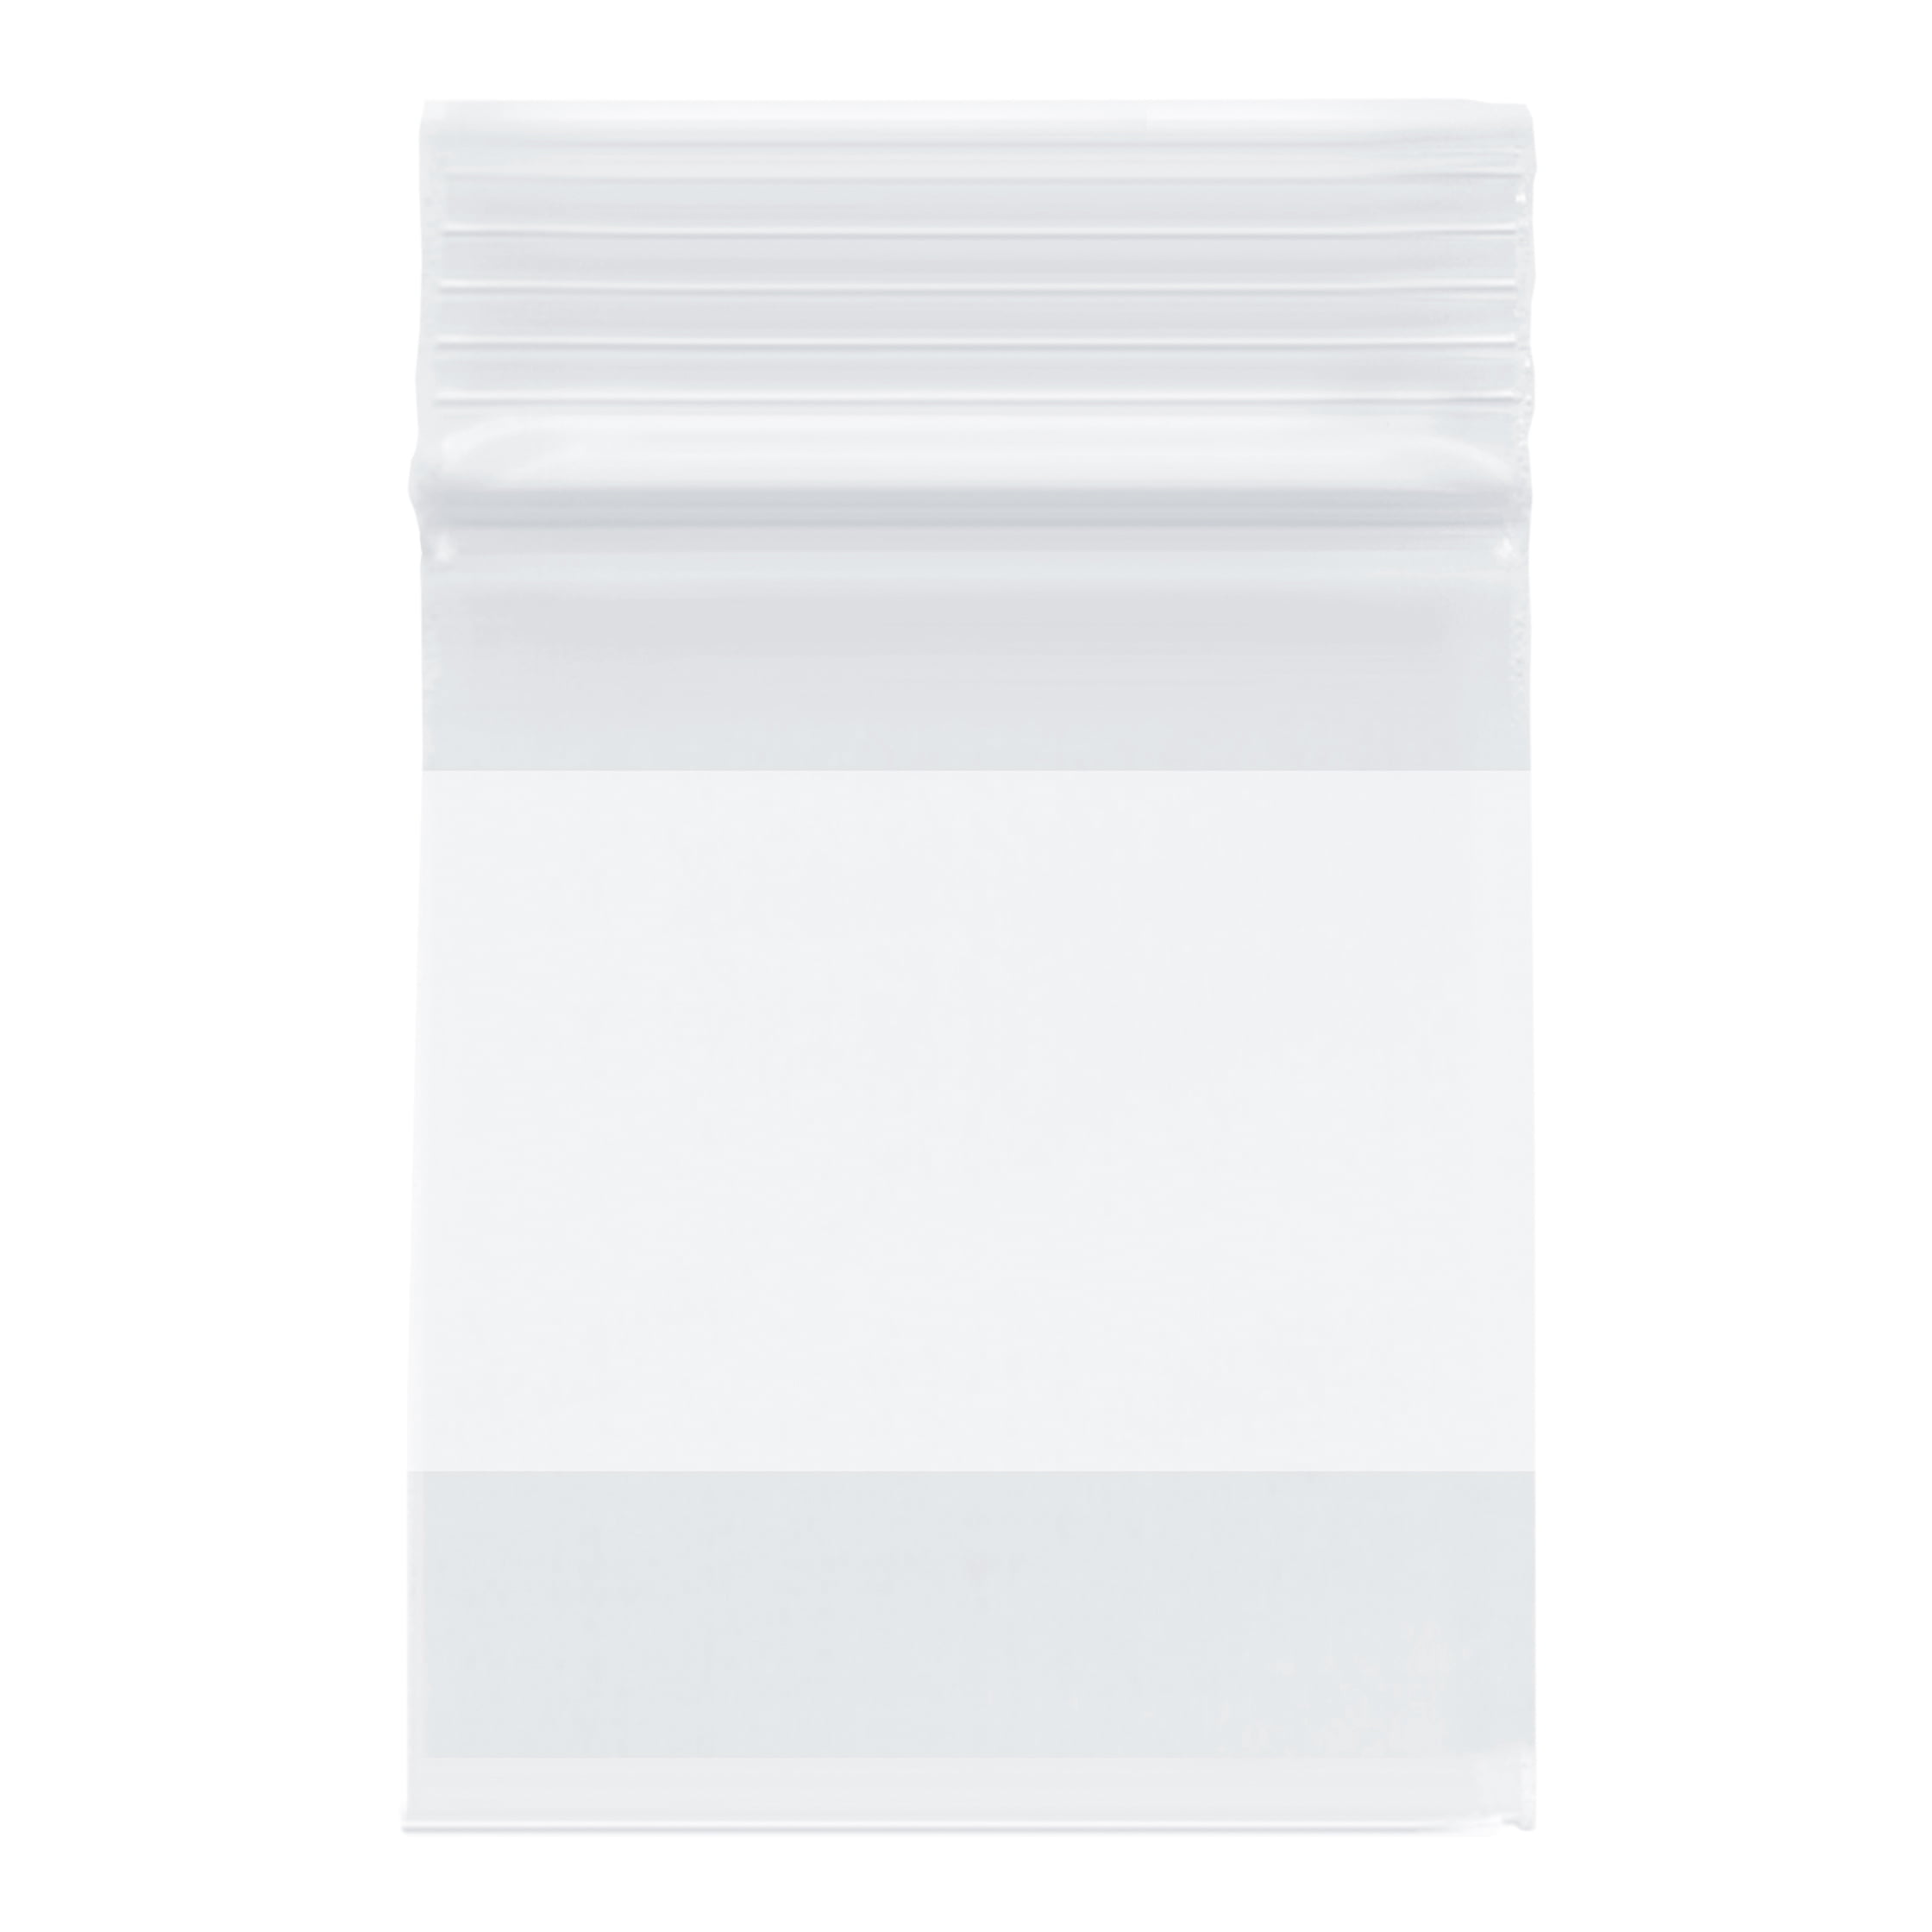 13 X 18 More Sizes Available 100 Count 2 Mil Clear Plastic Reclosable Zip Poly Bags with Resealable Lock Seal Zipper by Spartan Industrial 